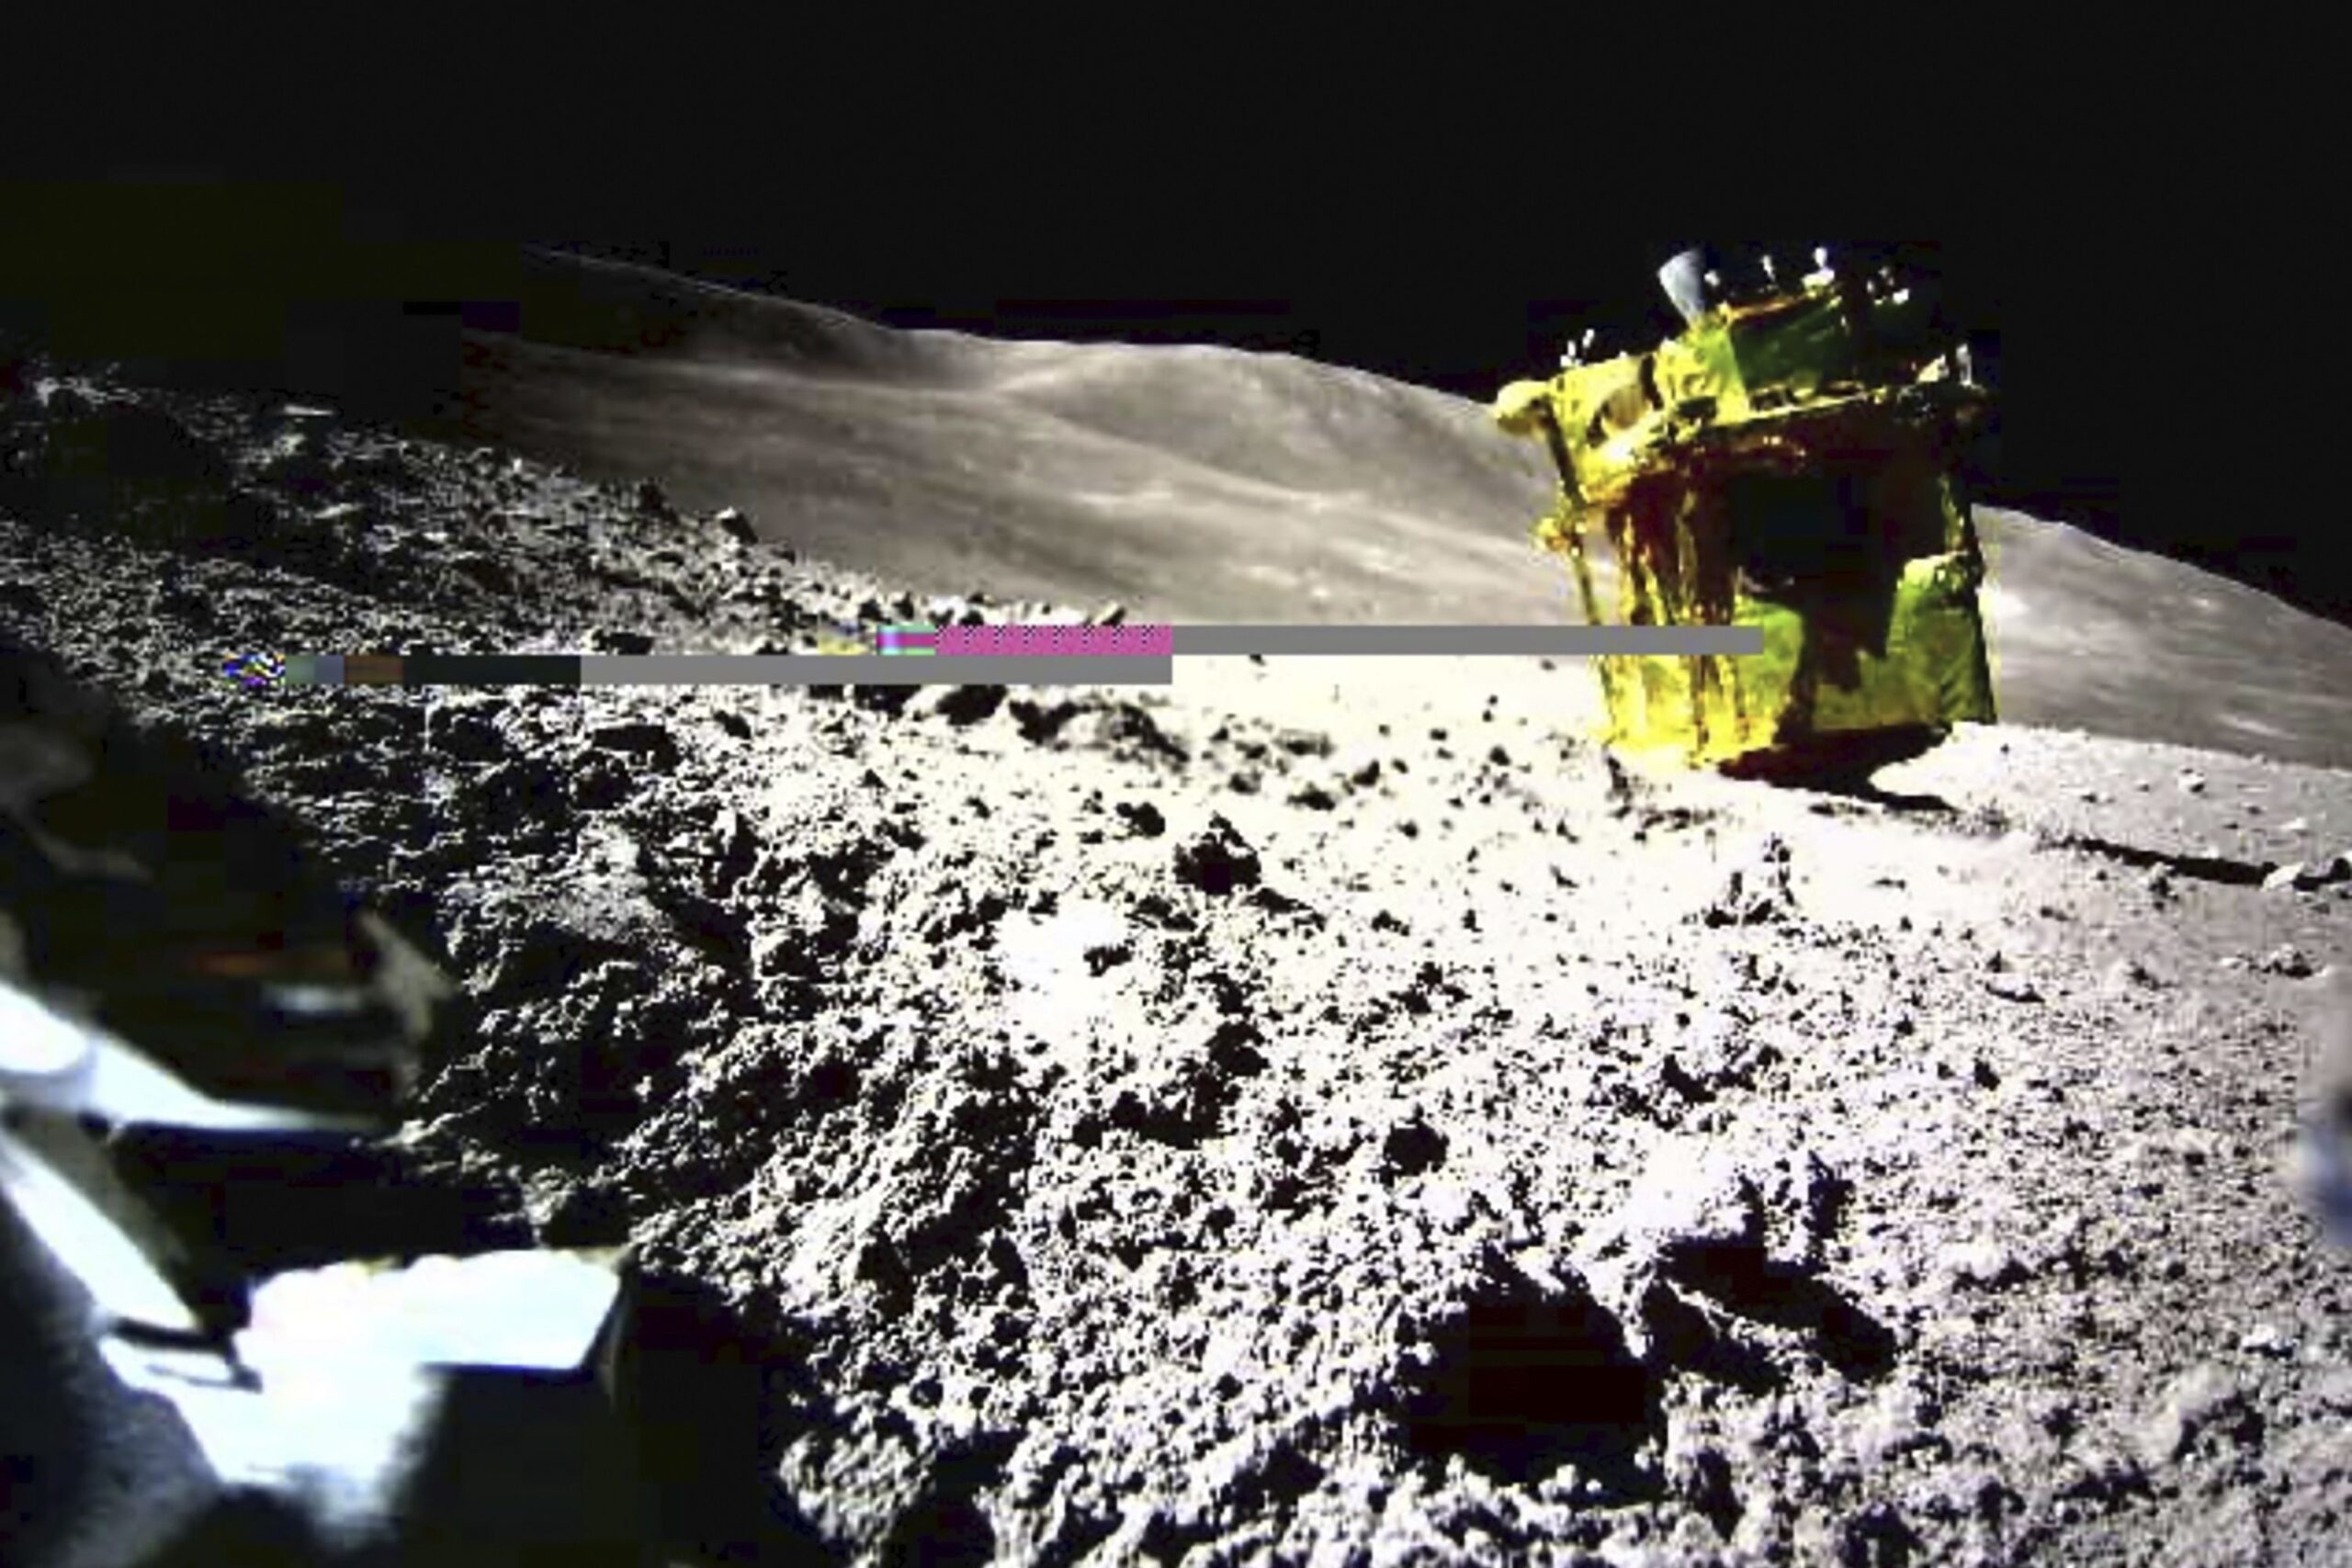 Japan’s precision moon lander has hit its target, but appears to be upside down